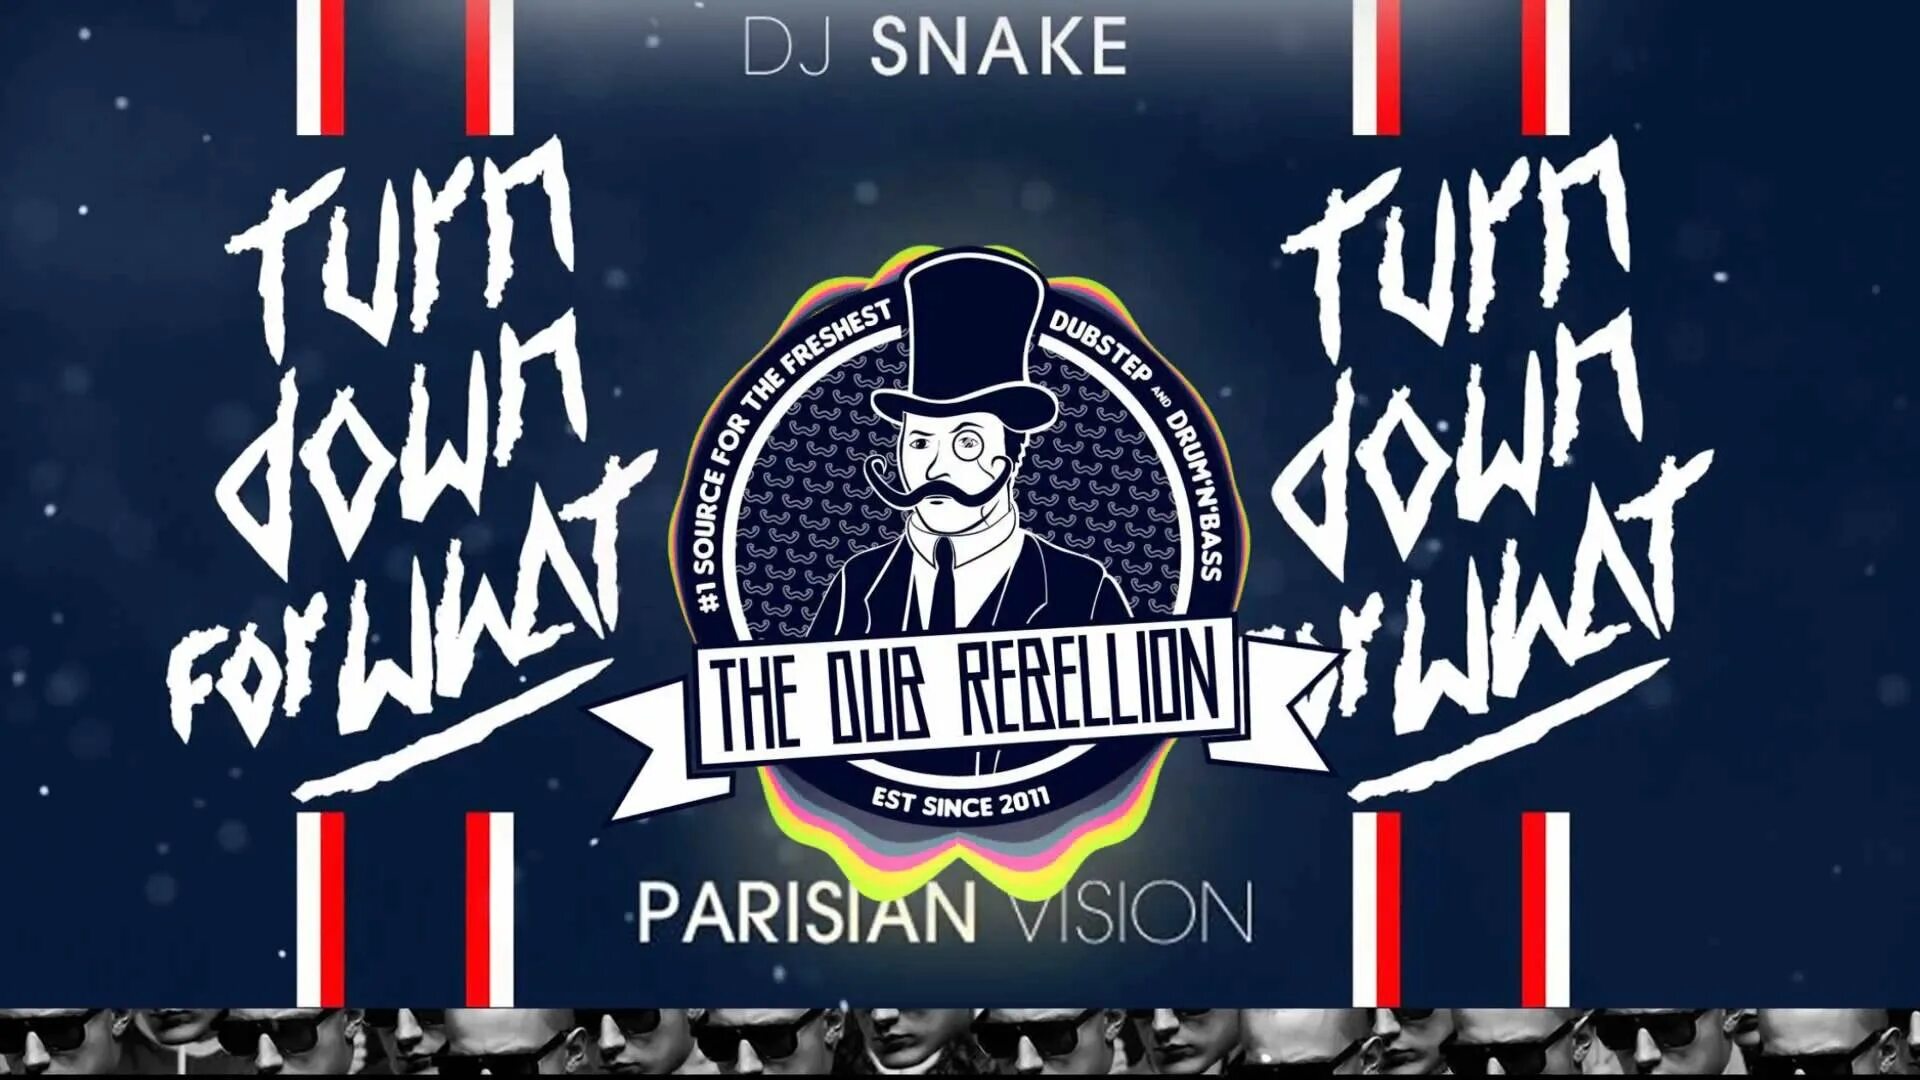 DJ Snake Lil Jon. DJ Snake turn down for what. DJ Snake, Lil Jon - turn down for what. DJ Snake - turn down for what (Official Remix).